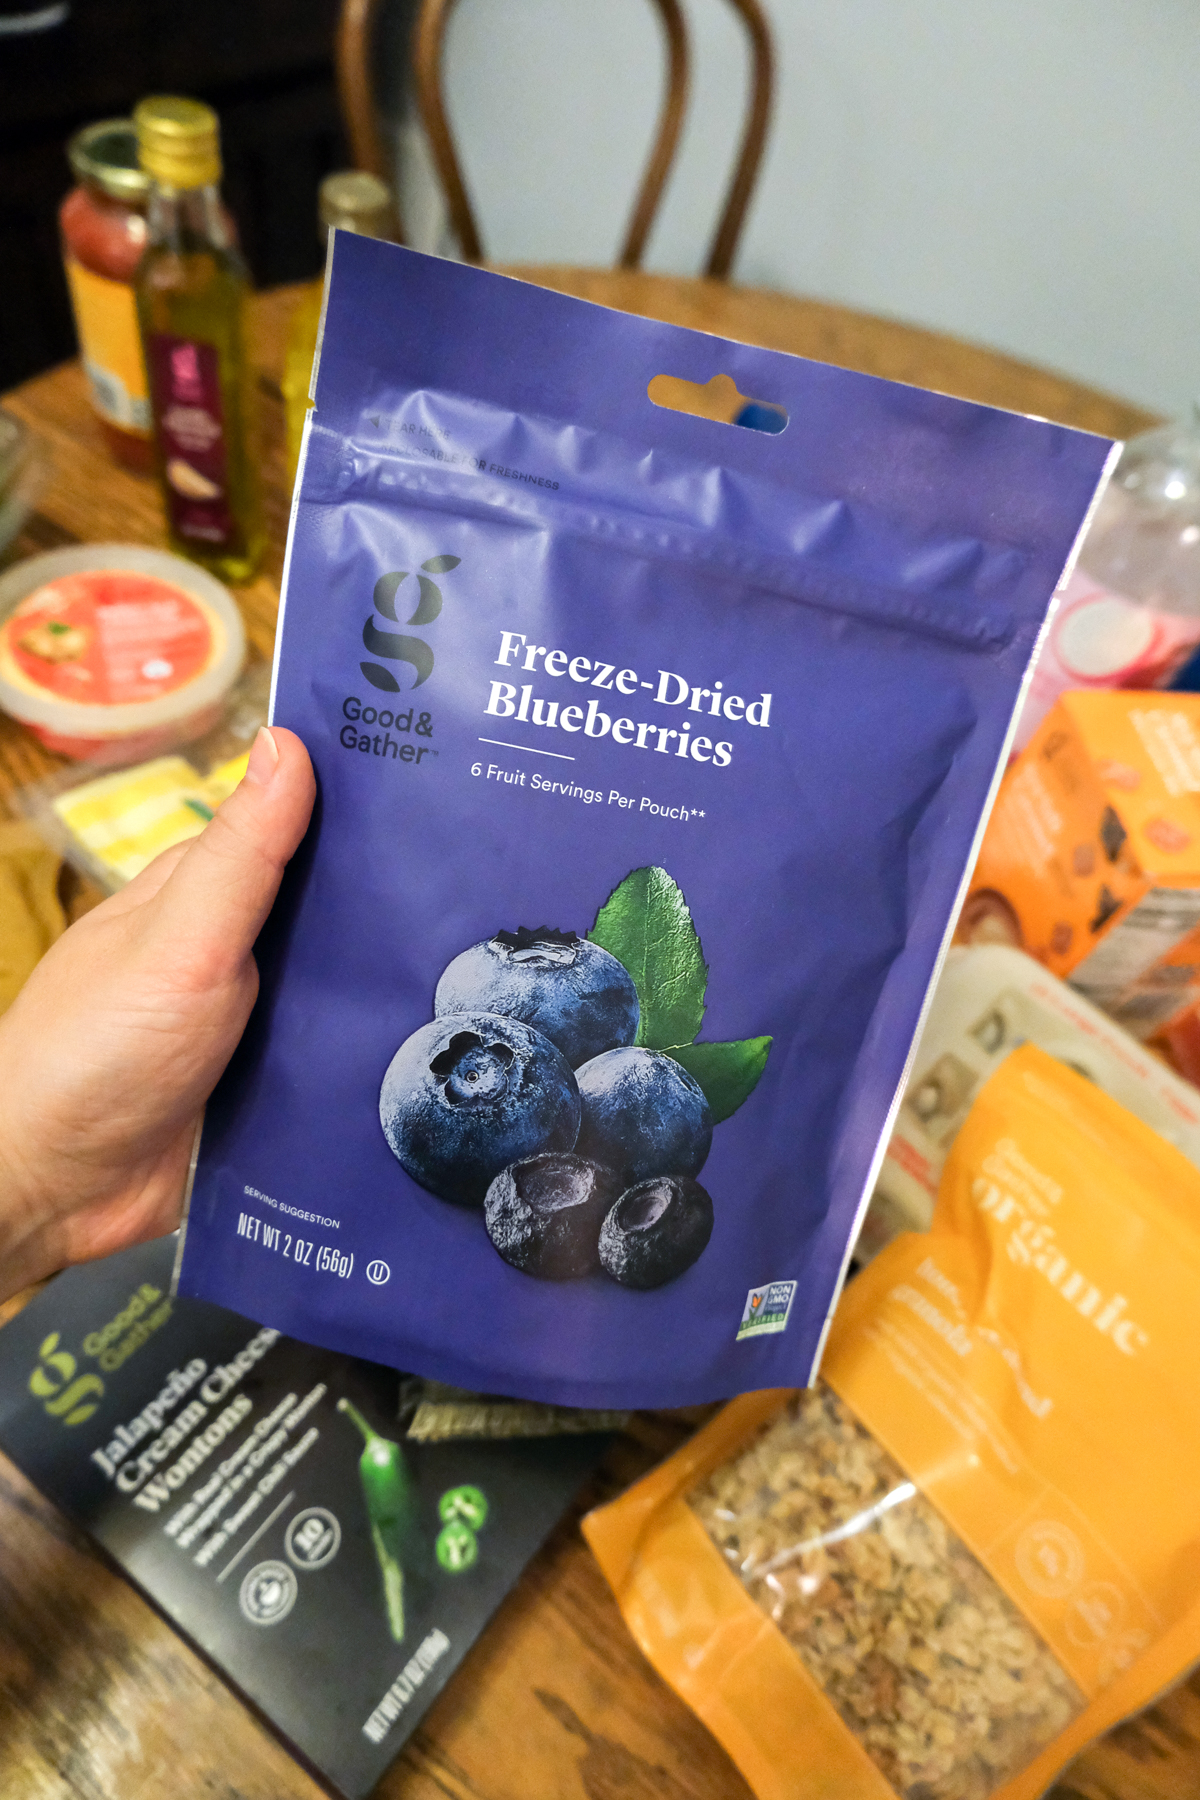 freeze dried blueberries Good & Gather from Target